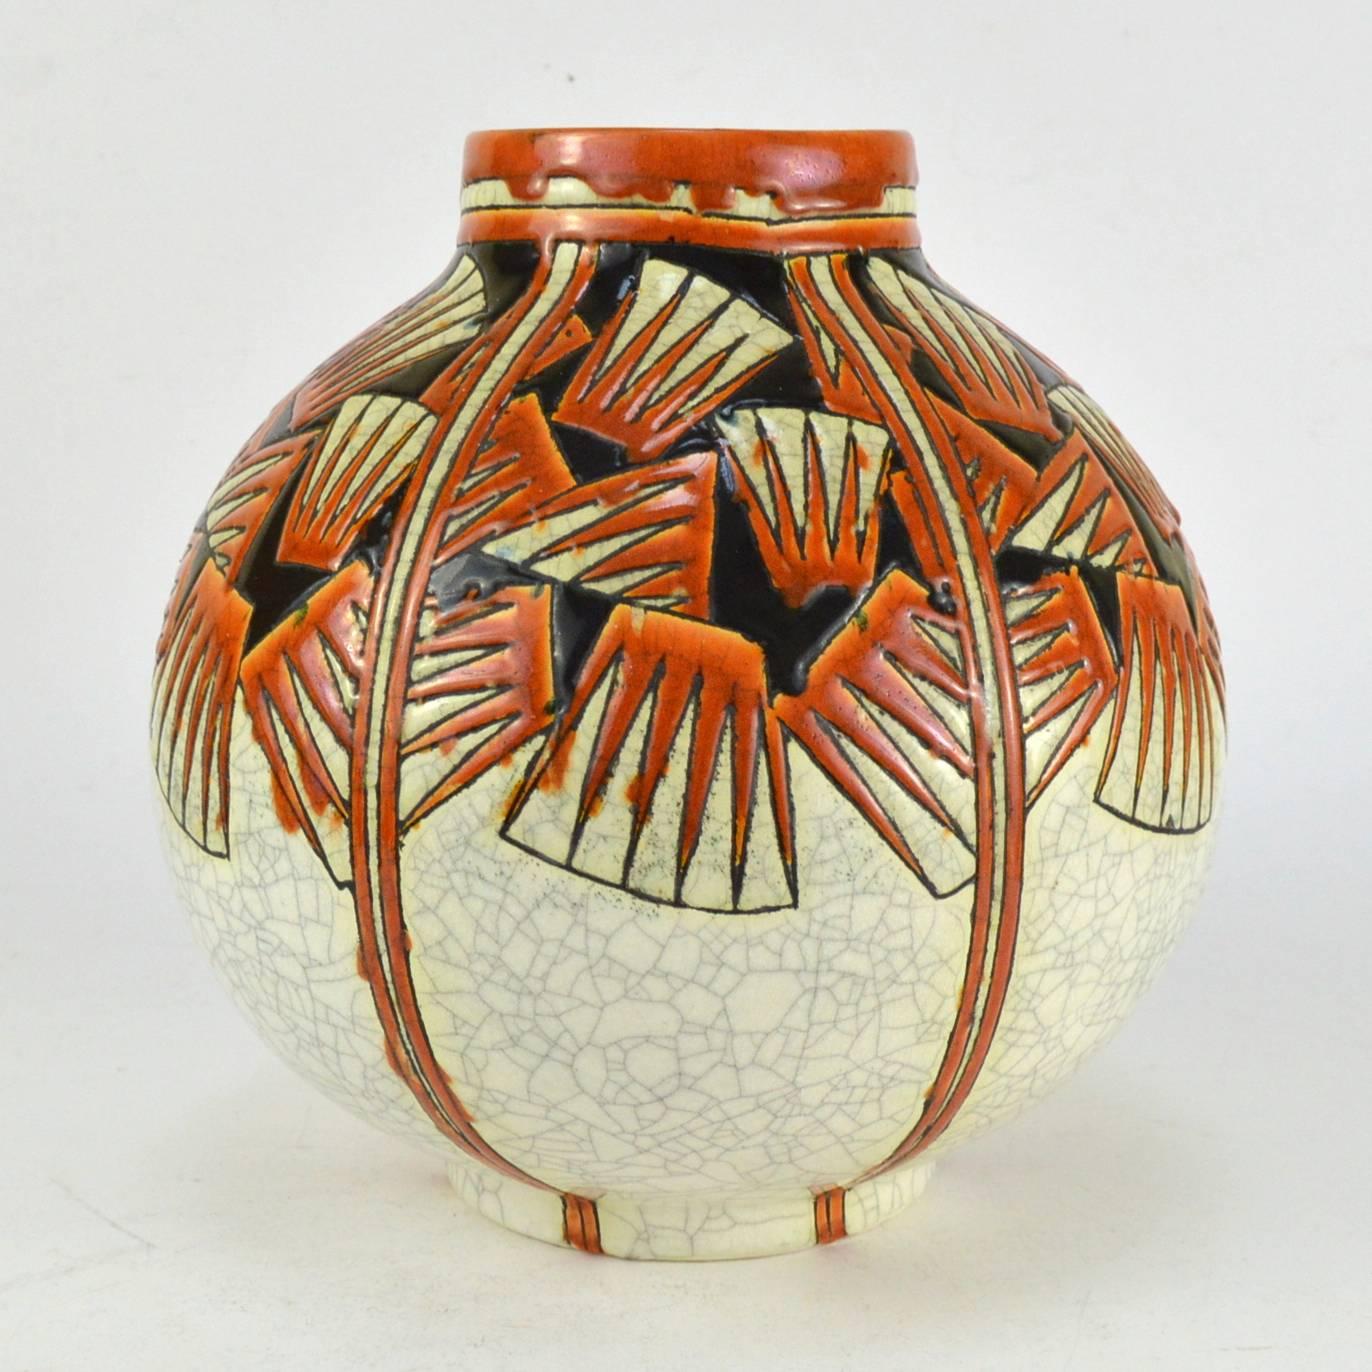 Charles Catteau (1880-1966) Faience ceramic and polychrome enamels vase by Boch brothers Keramis, Belgium. 
Decor nr. 1120 , shape nr. 894.
Dimensions: Ø - 23 cm.